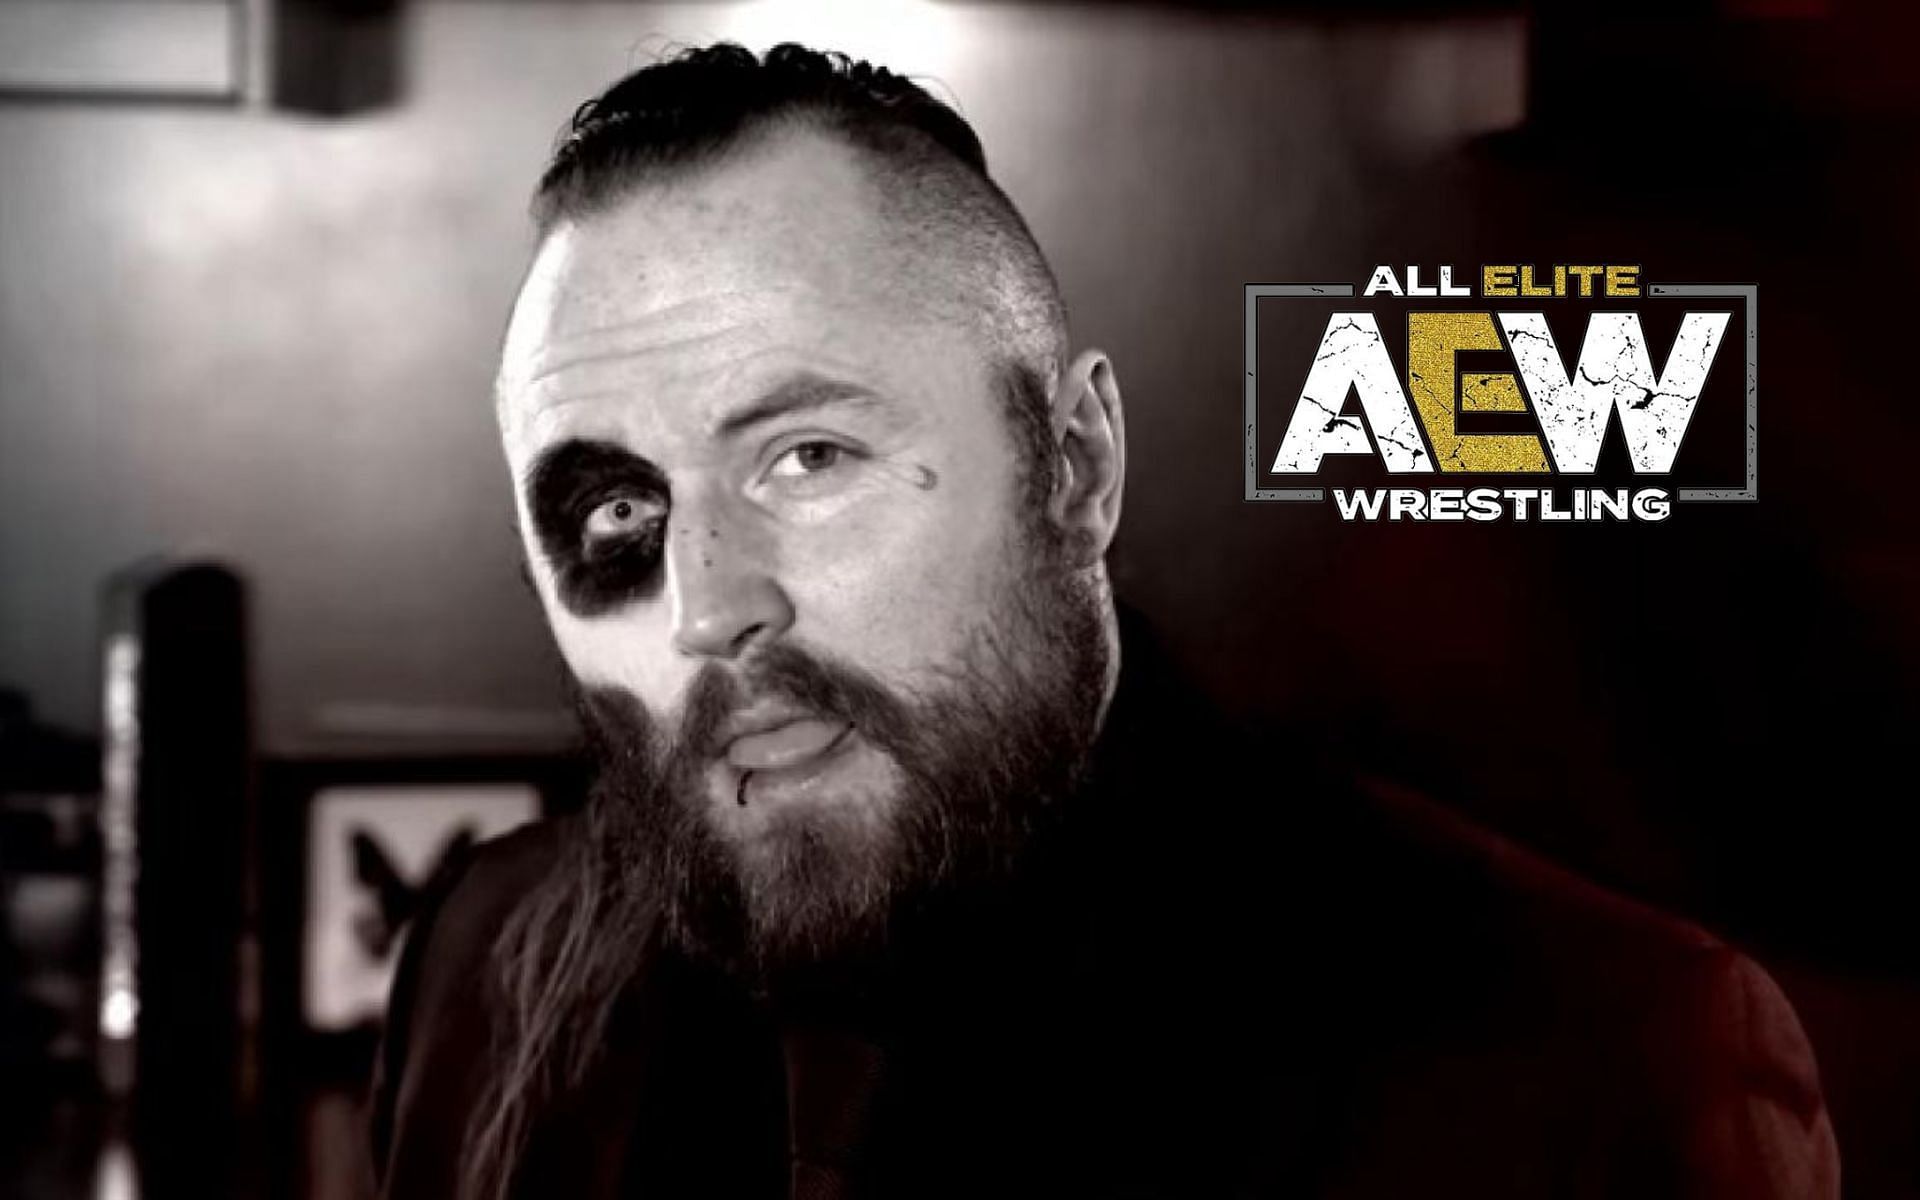 Malakai Black laid it out about his AEW and wrestling future in a social media post.